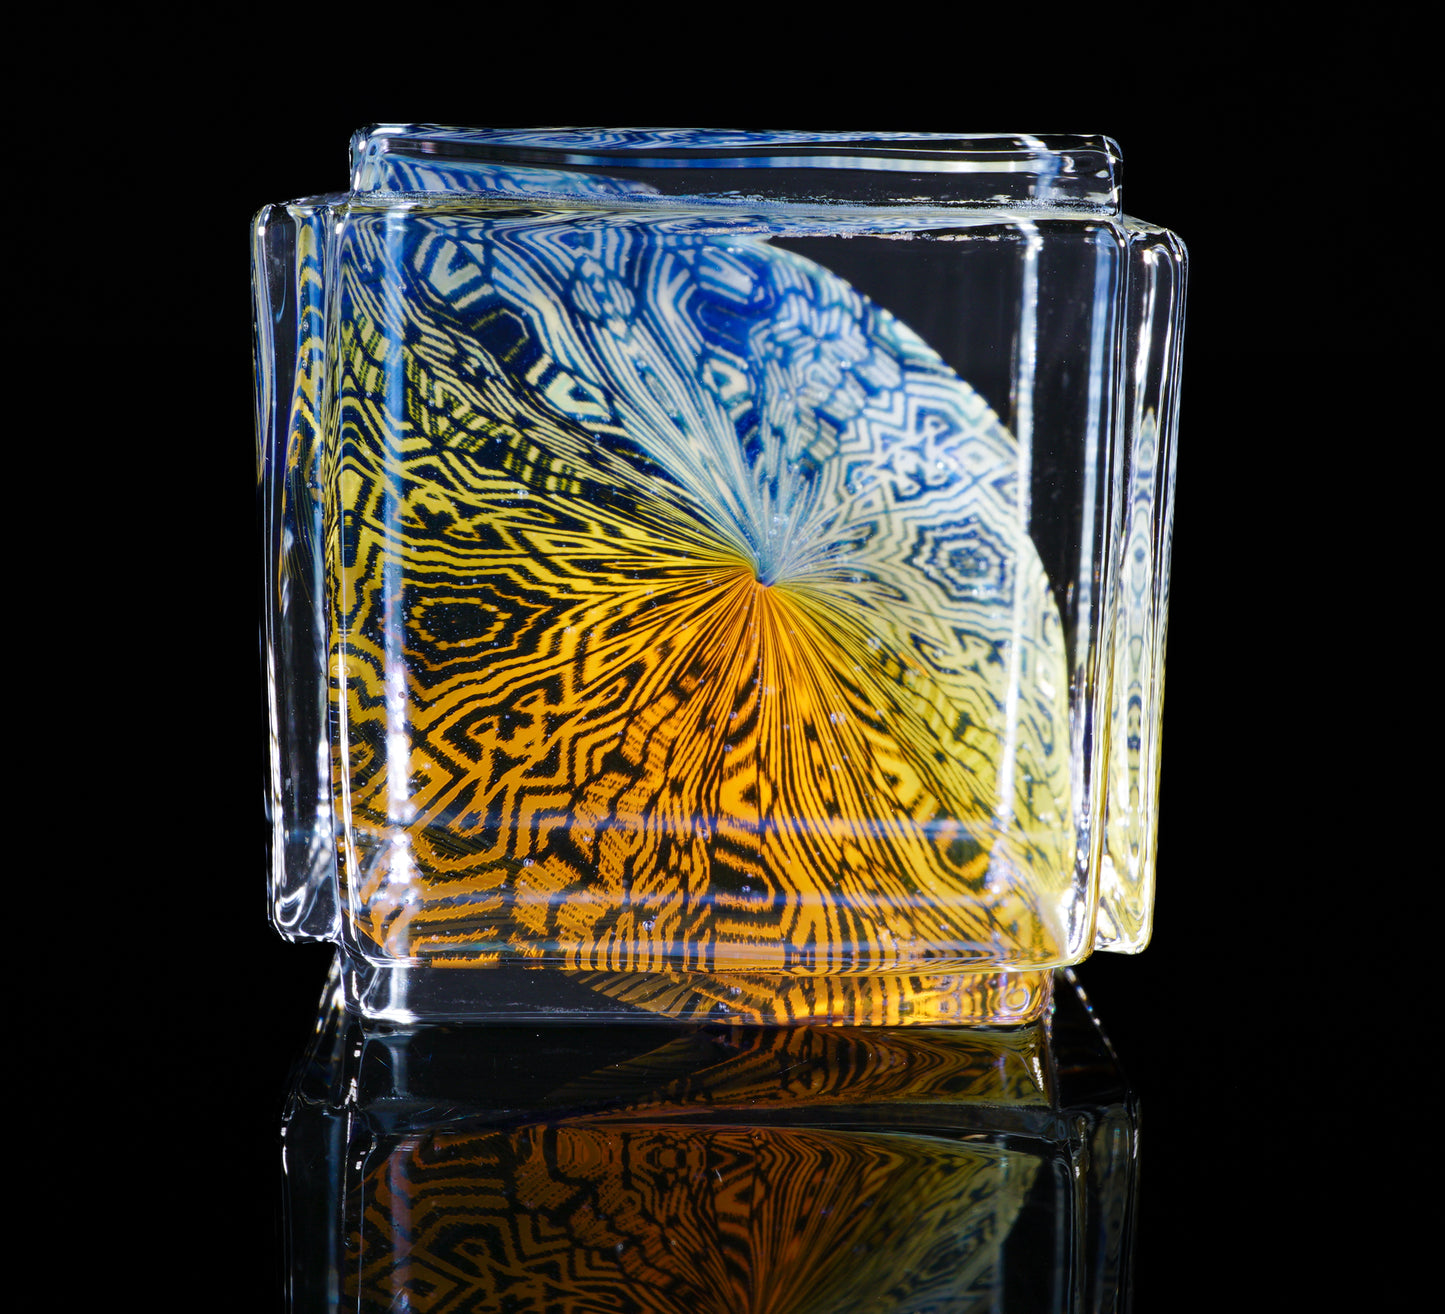 Extruded Fume Cube no.3